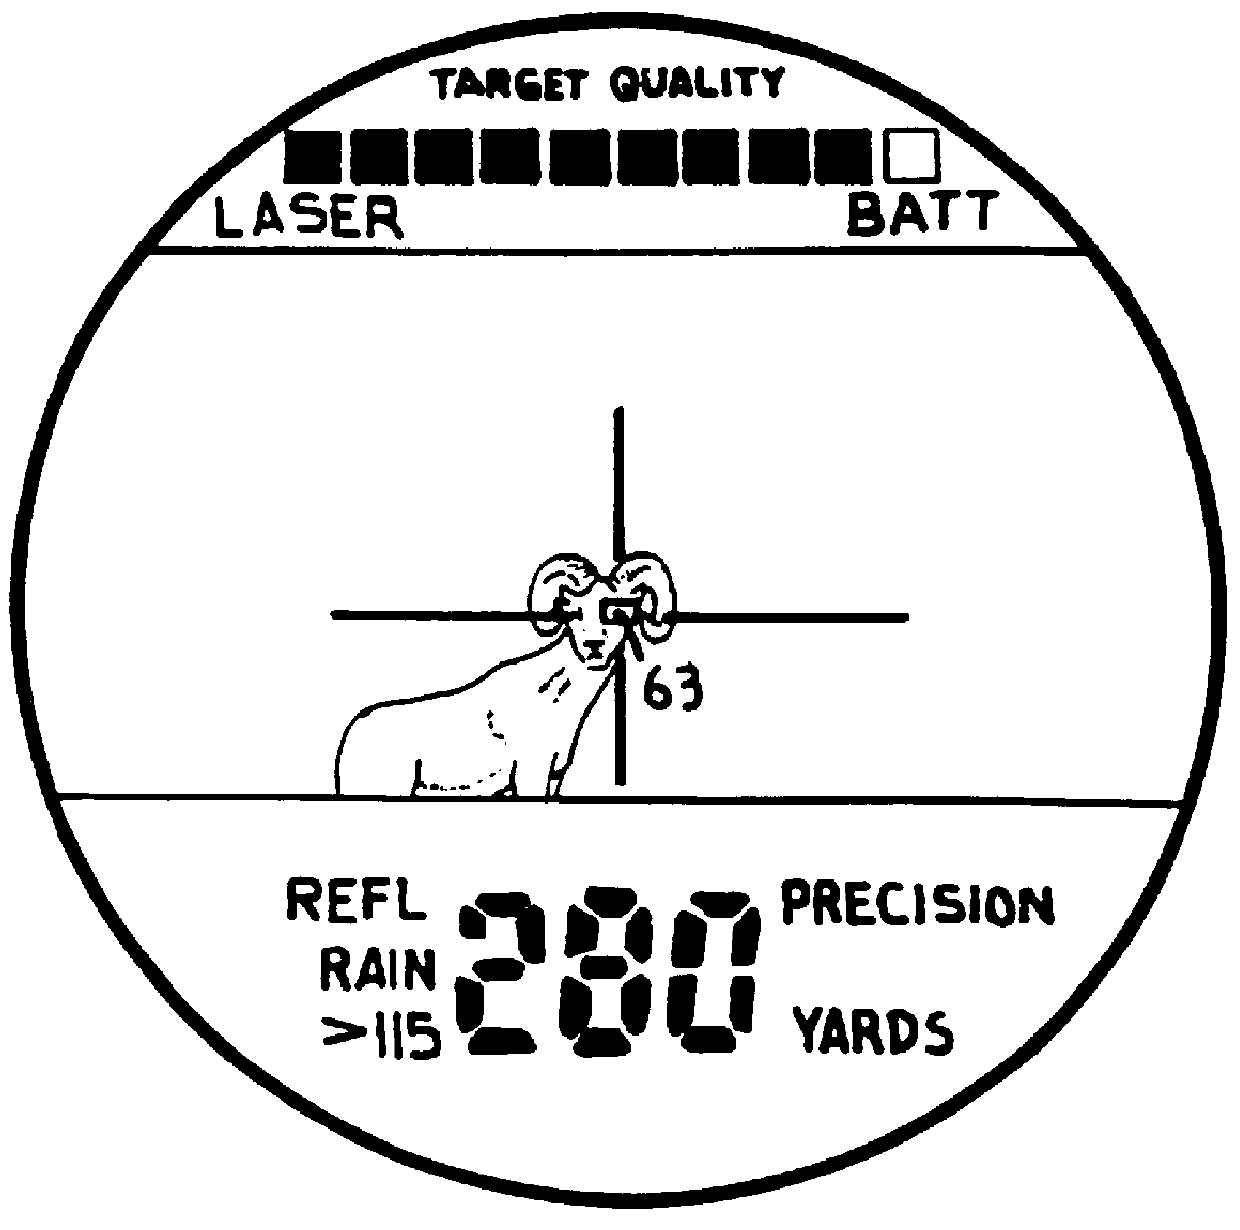 Laser range finder with target quality display and scan mode